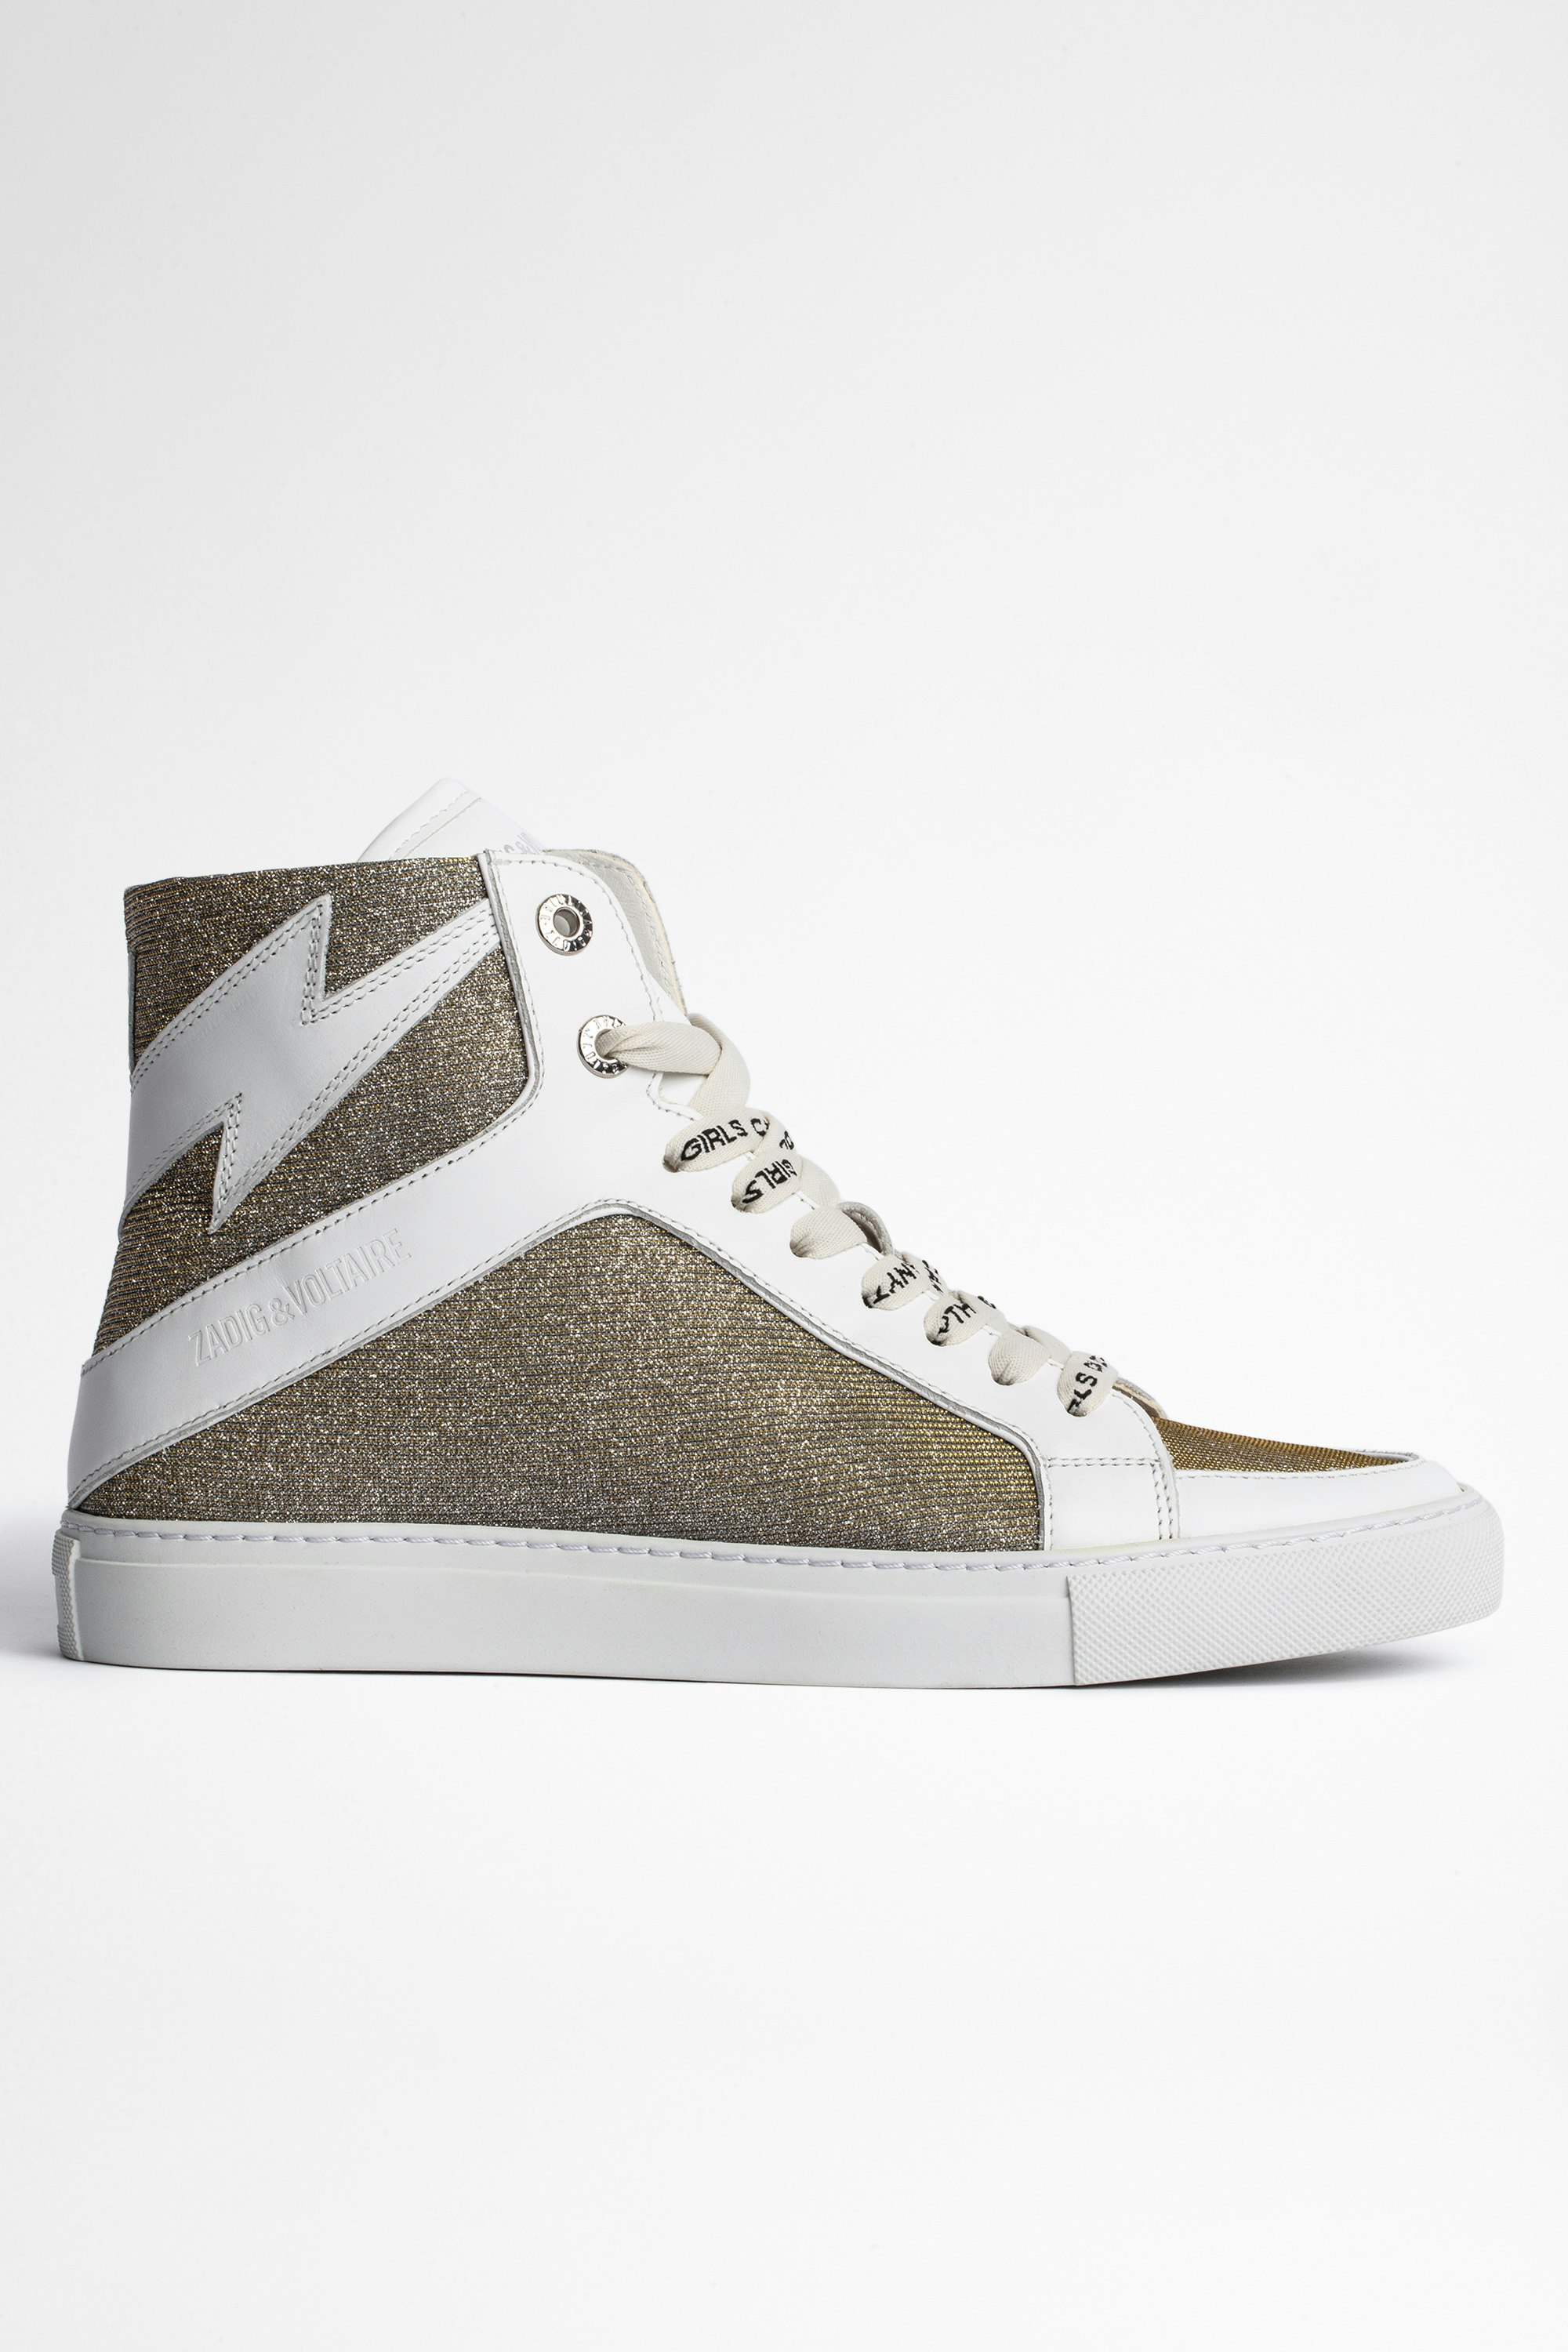 ZV1747 High Flash Sneakers - Women's high-top sneakers in smooth white leather and silver glittery fabric